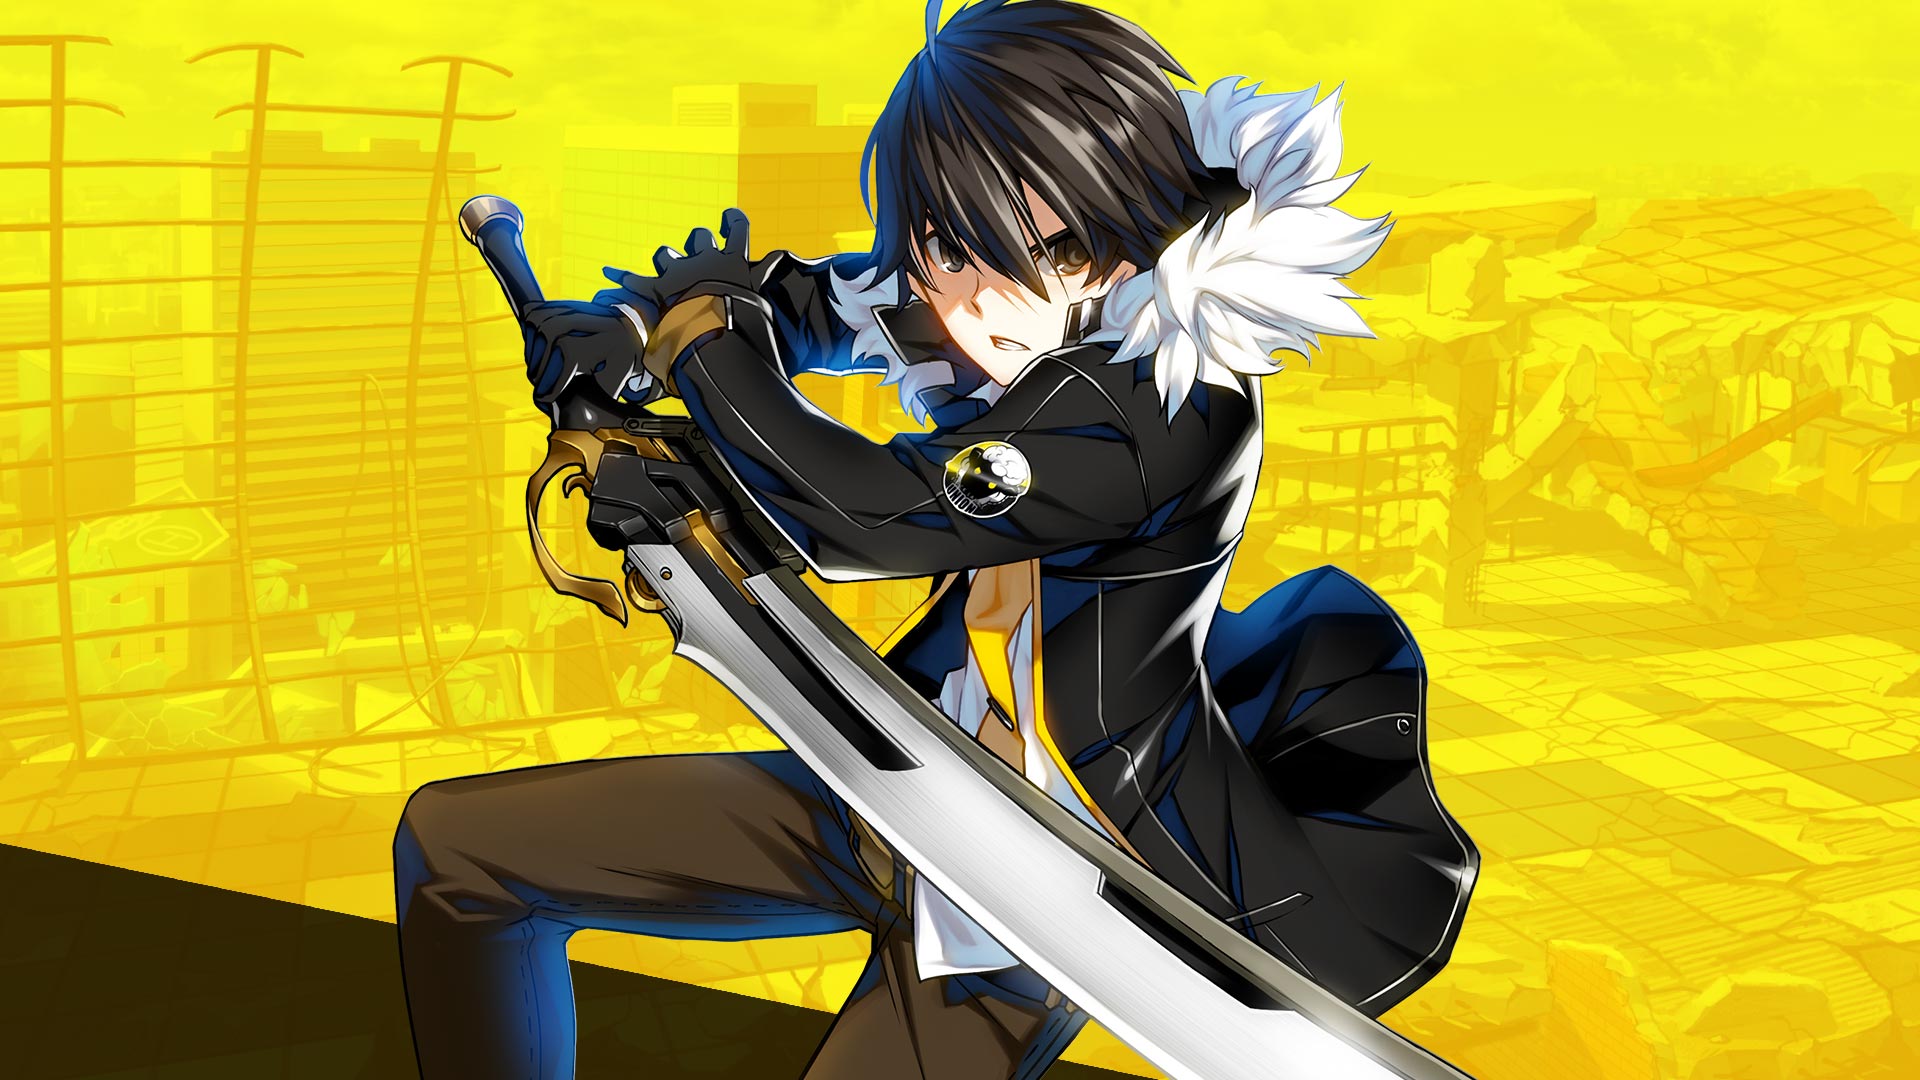 video game, closers, closers (anime)